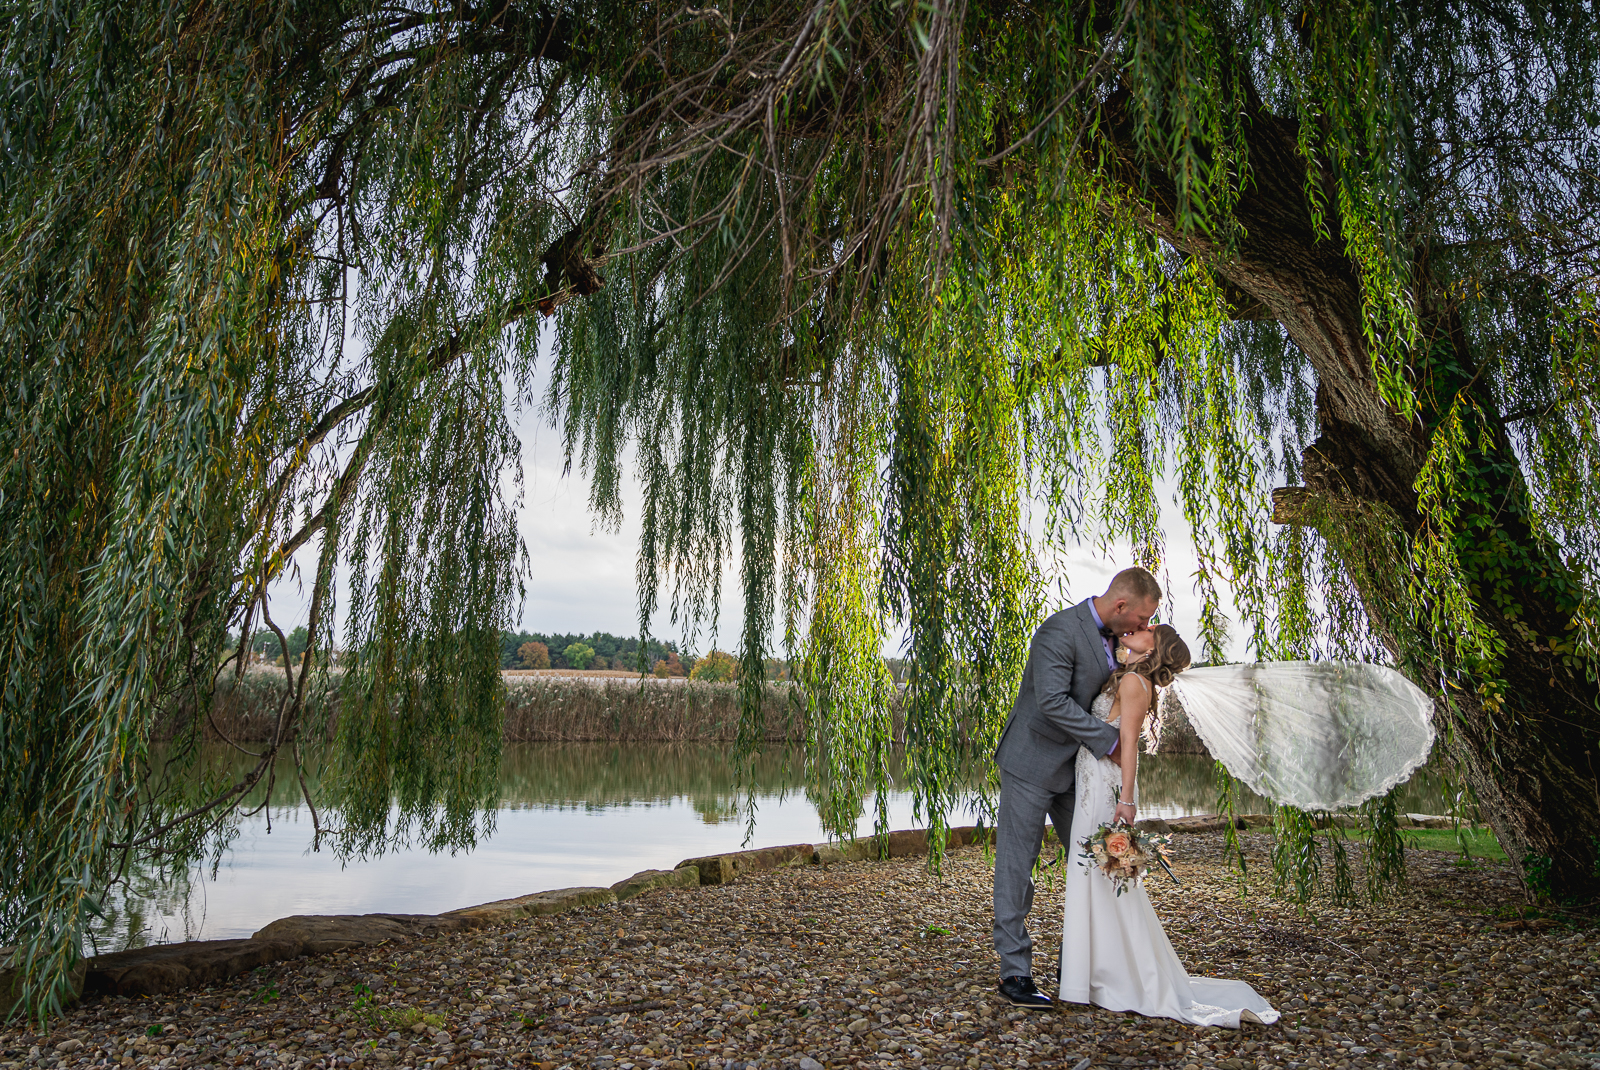 Bride and groom wedding portrait, kiss, veil, weeping willow, tree, nature, fall wedding, rustic outdoor wedding ceremony at White Birch Barn